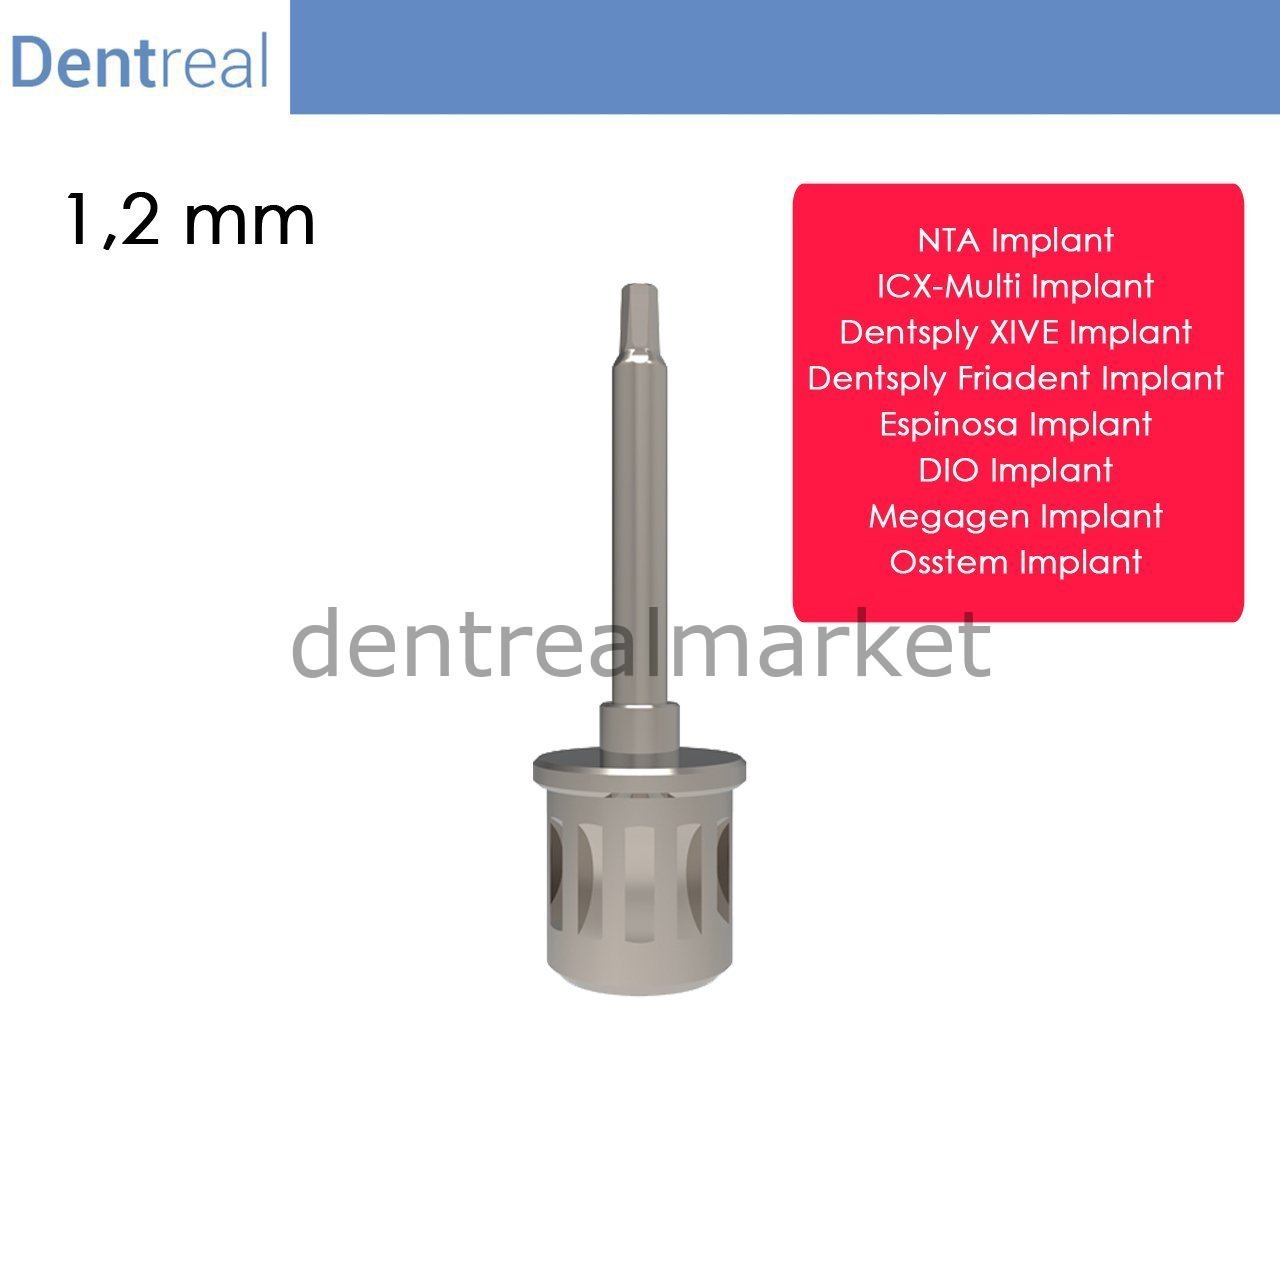 DentrealStore - Dentreal Screwdriver for Xive Implant - 1,20 mm Hex Driver